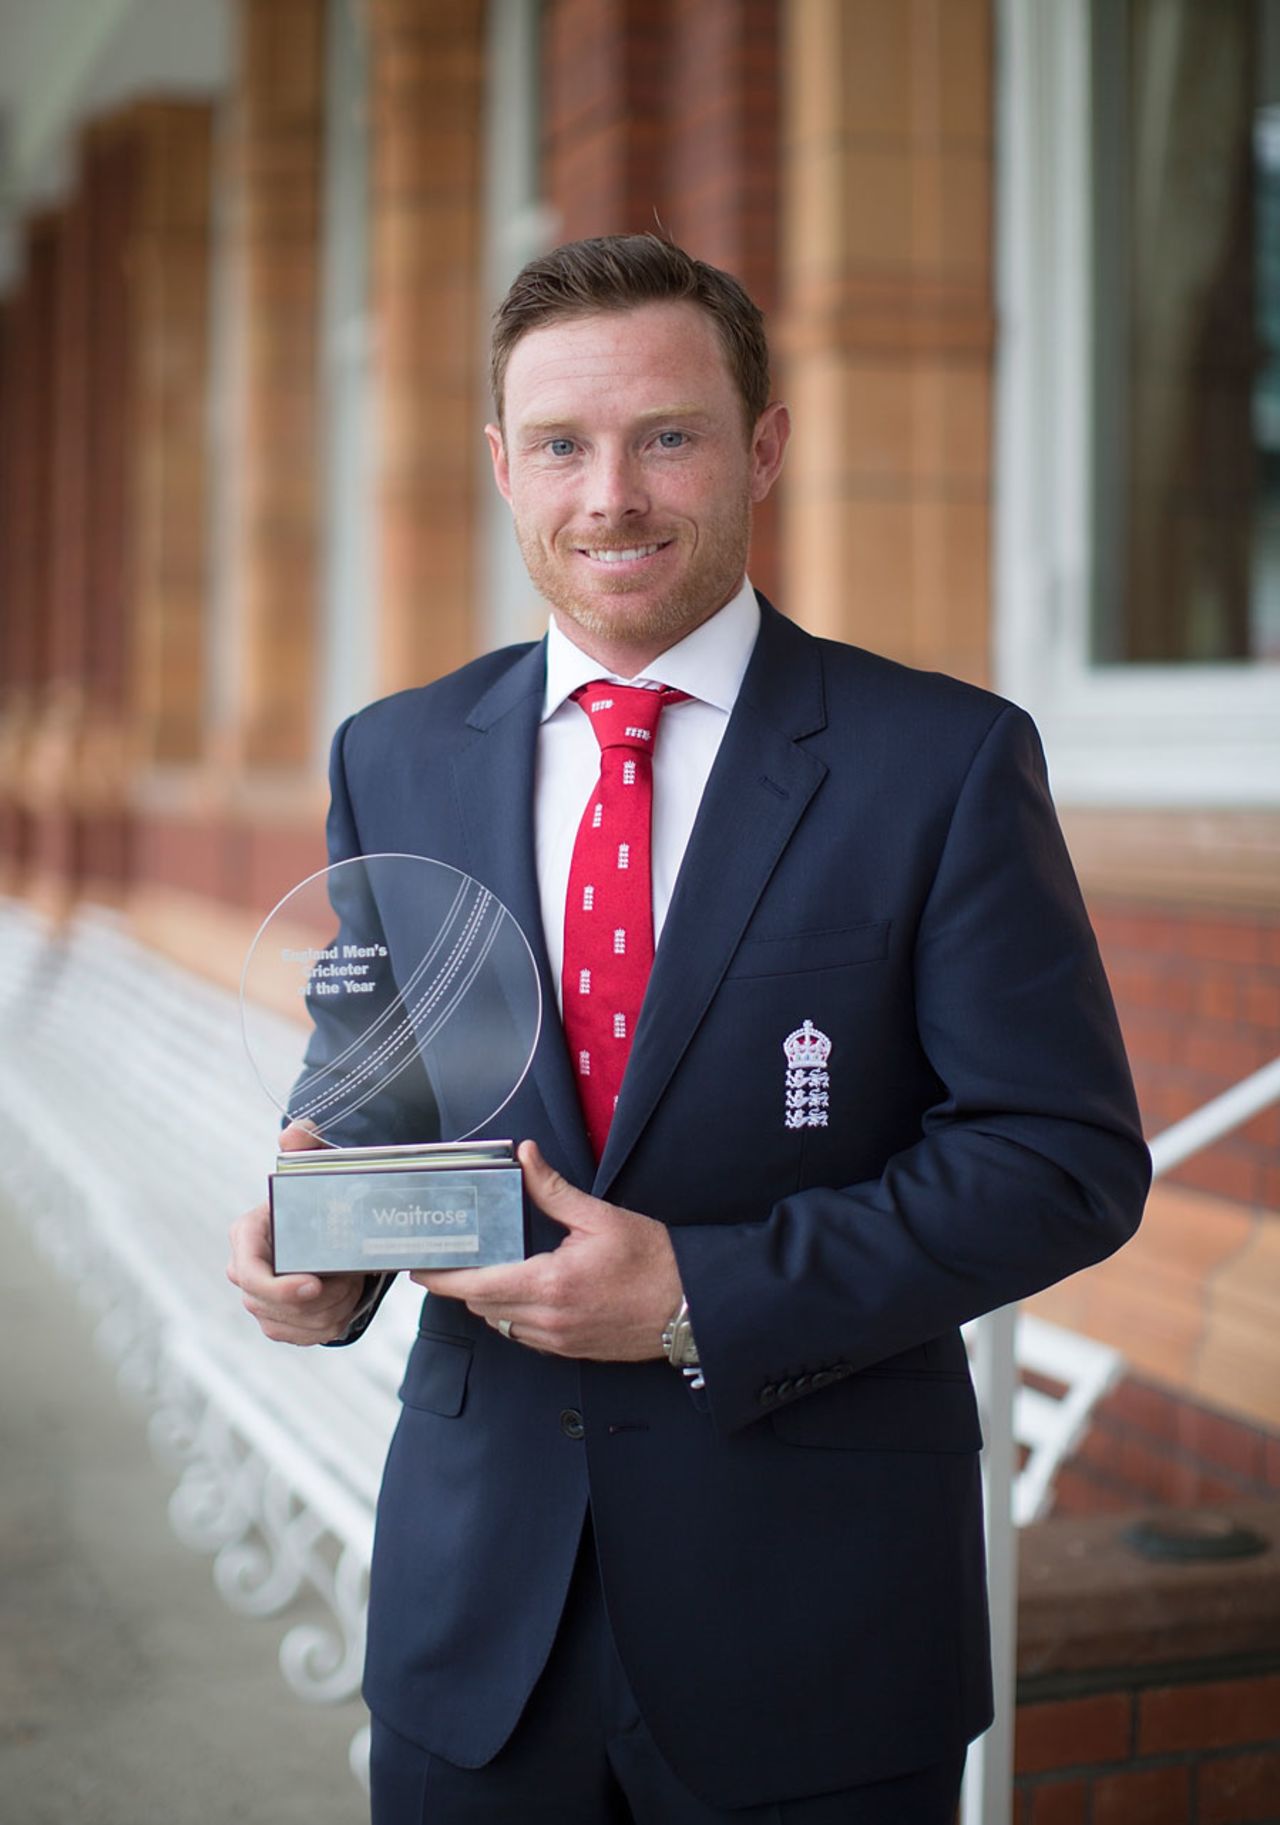 Ian Bell was named England's 2013-14 Player of the Year, Lord's, June 9, 2014